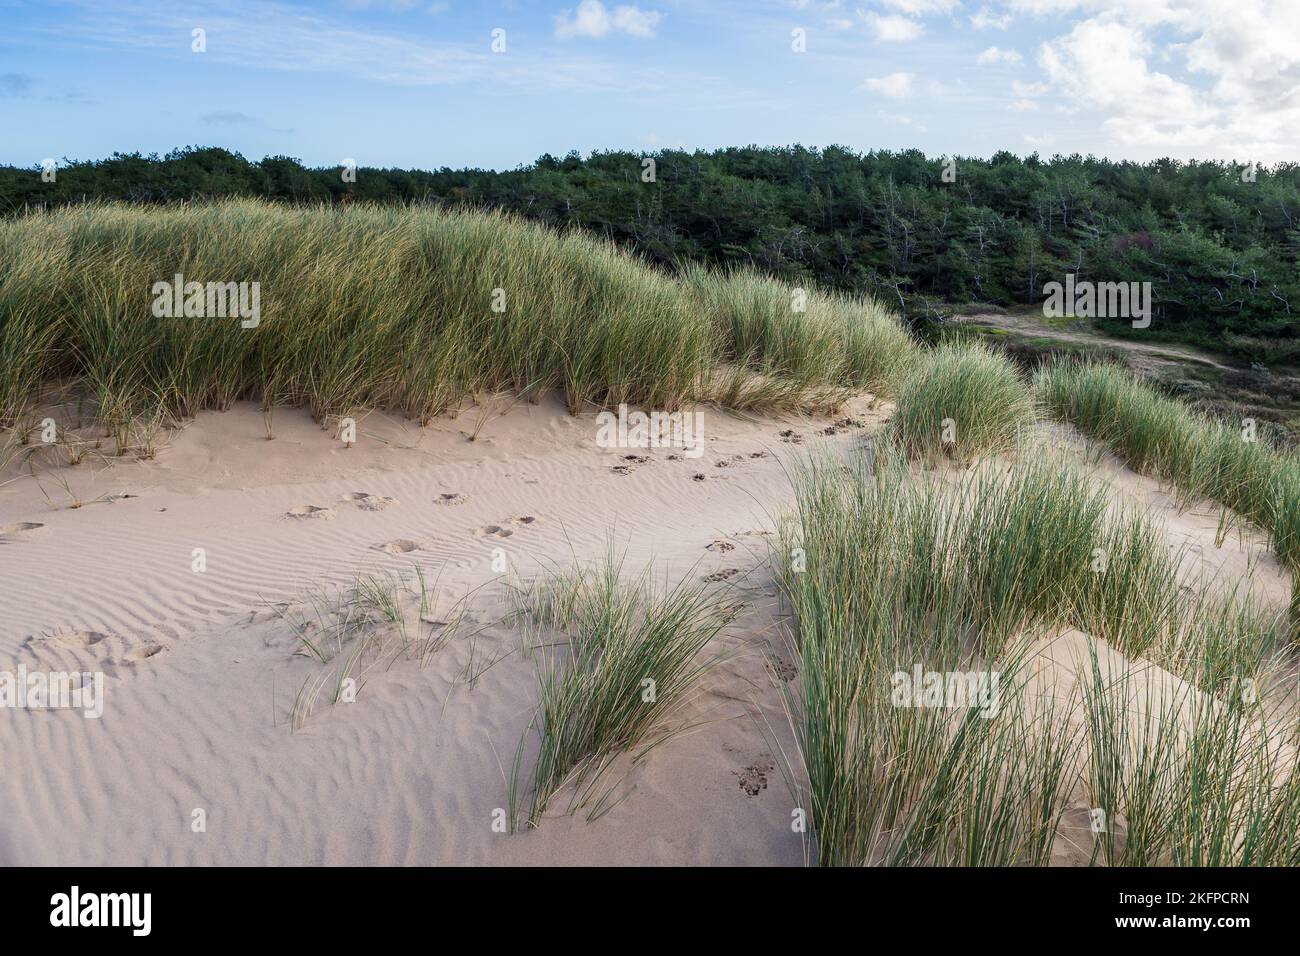 Foot steps break up the natural patterns on the dunes between Formby beach and the pine woods. Stock Photo